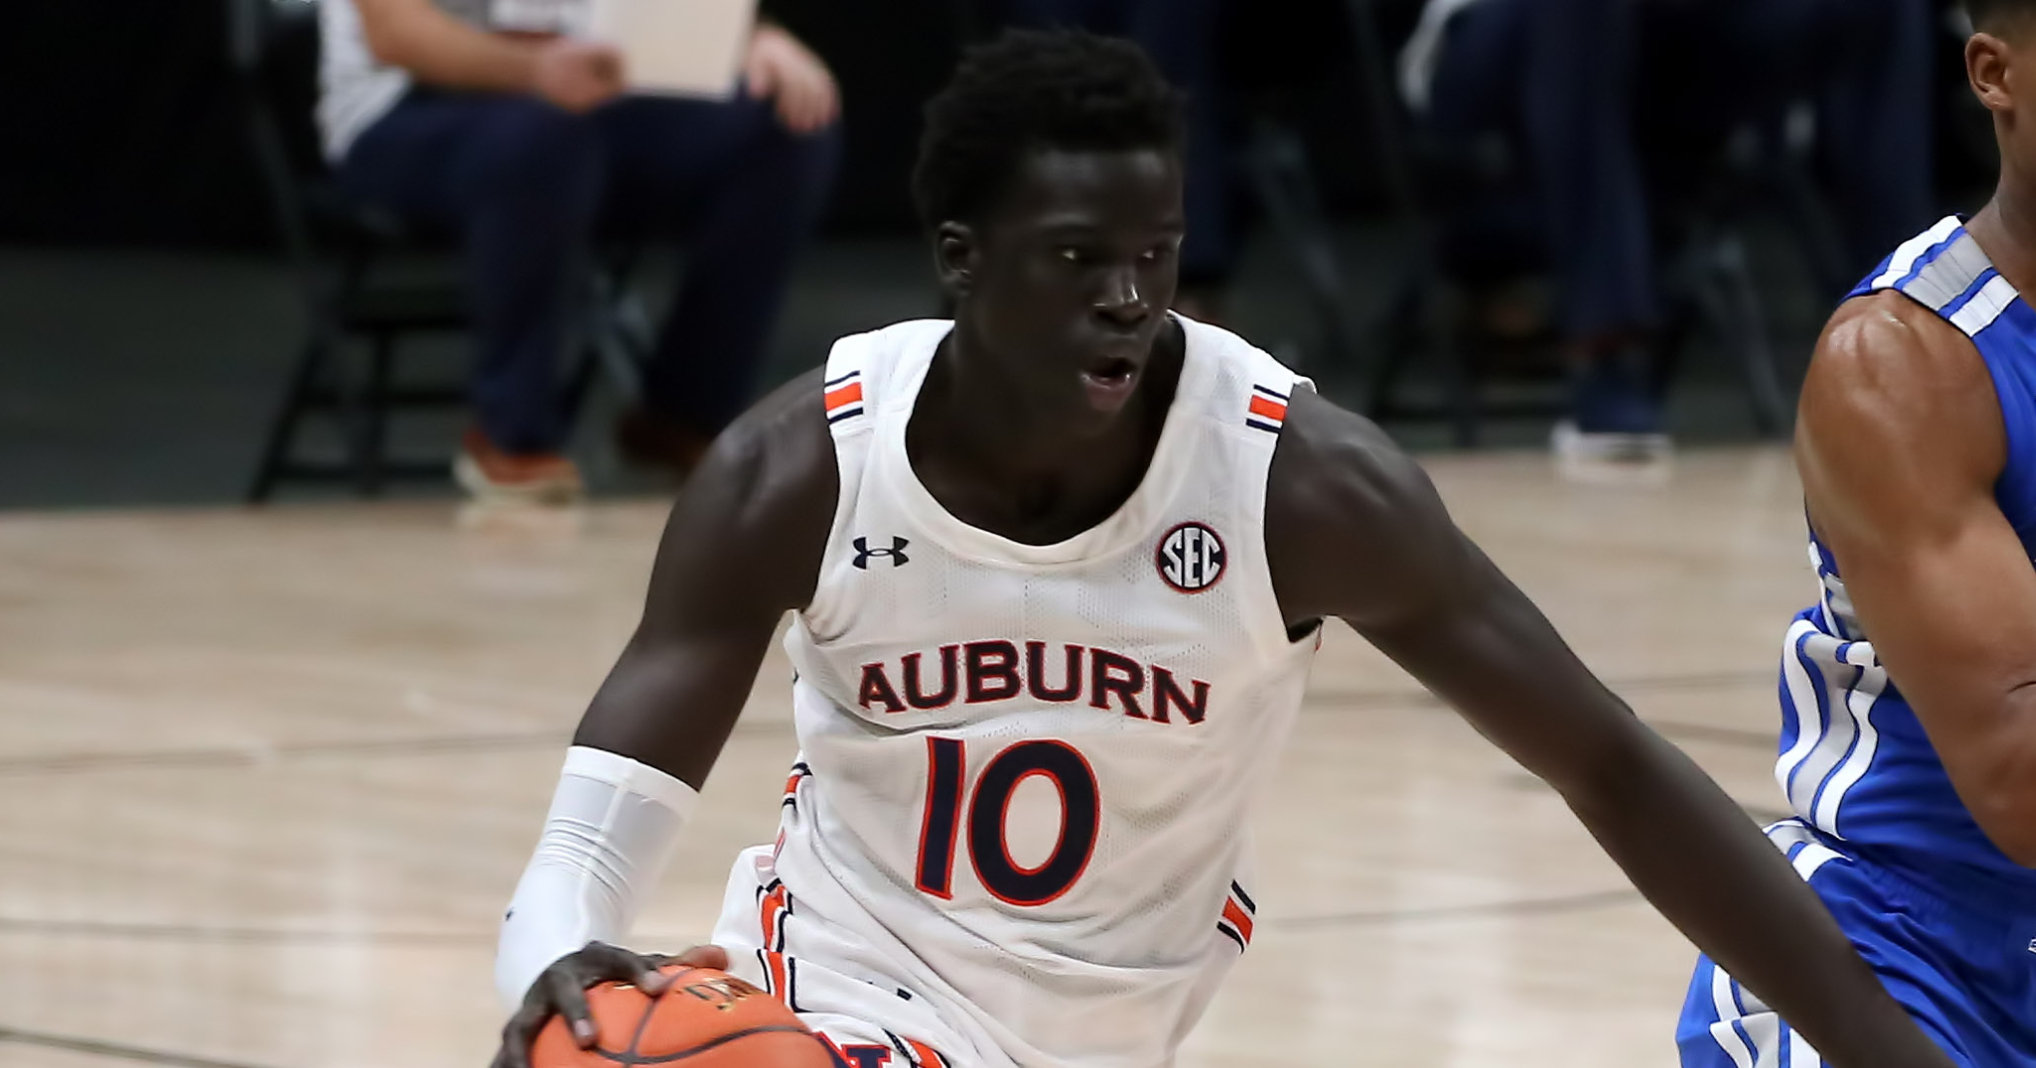 What the Charlotte Hornets are getting in Auburn basketball forward J.T.  Thor